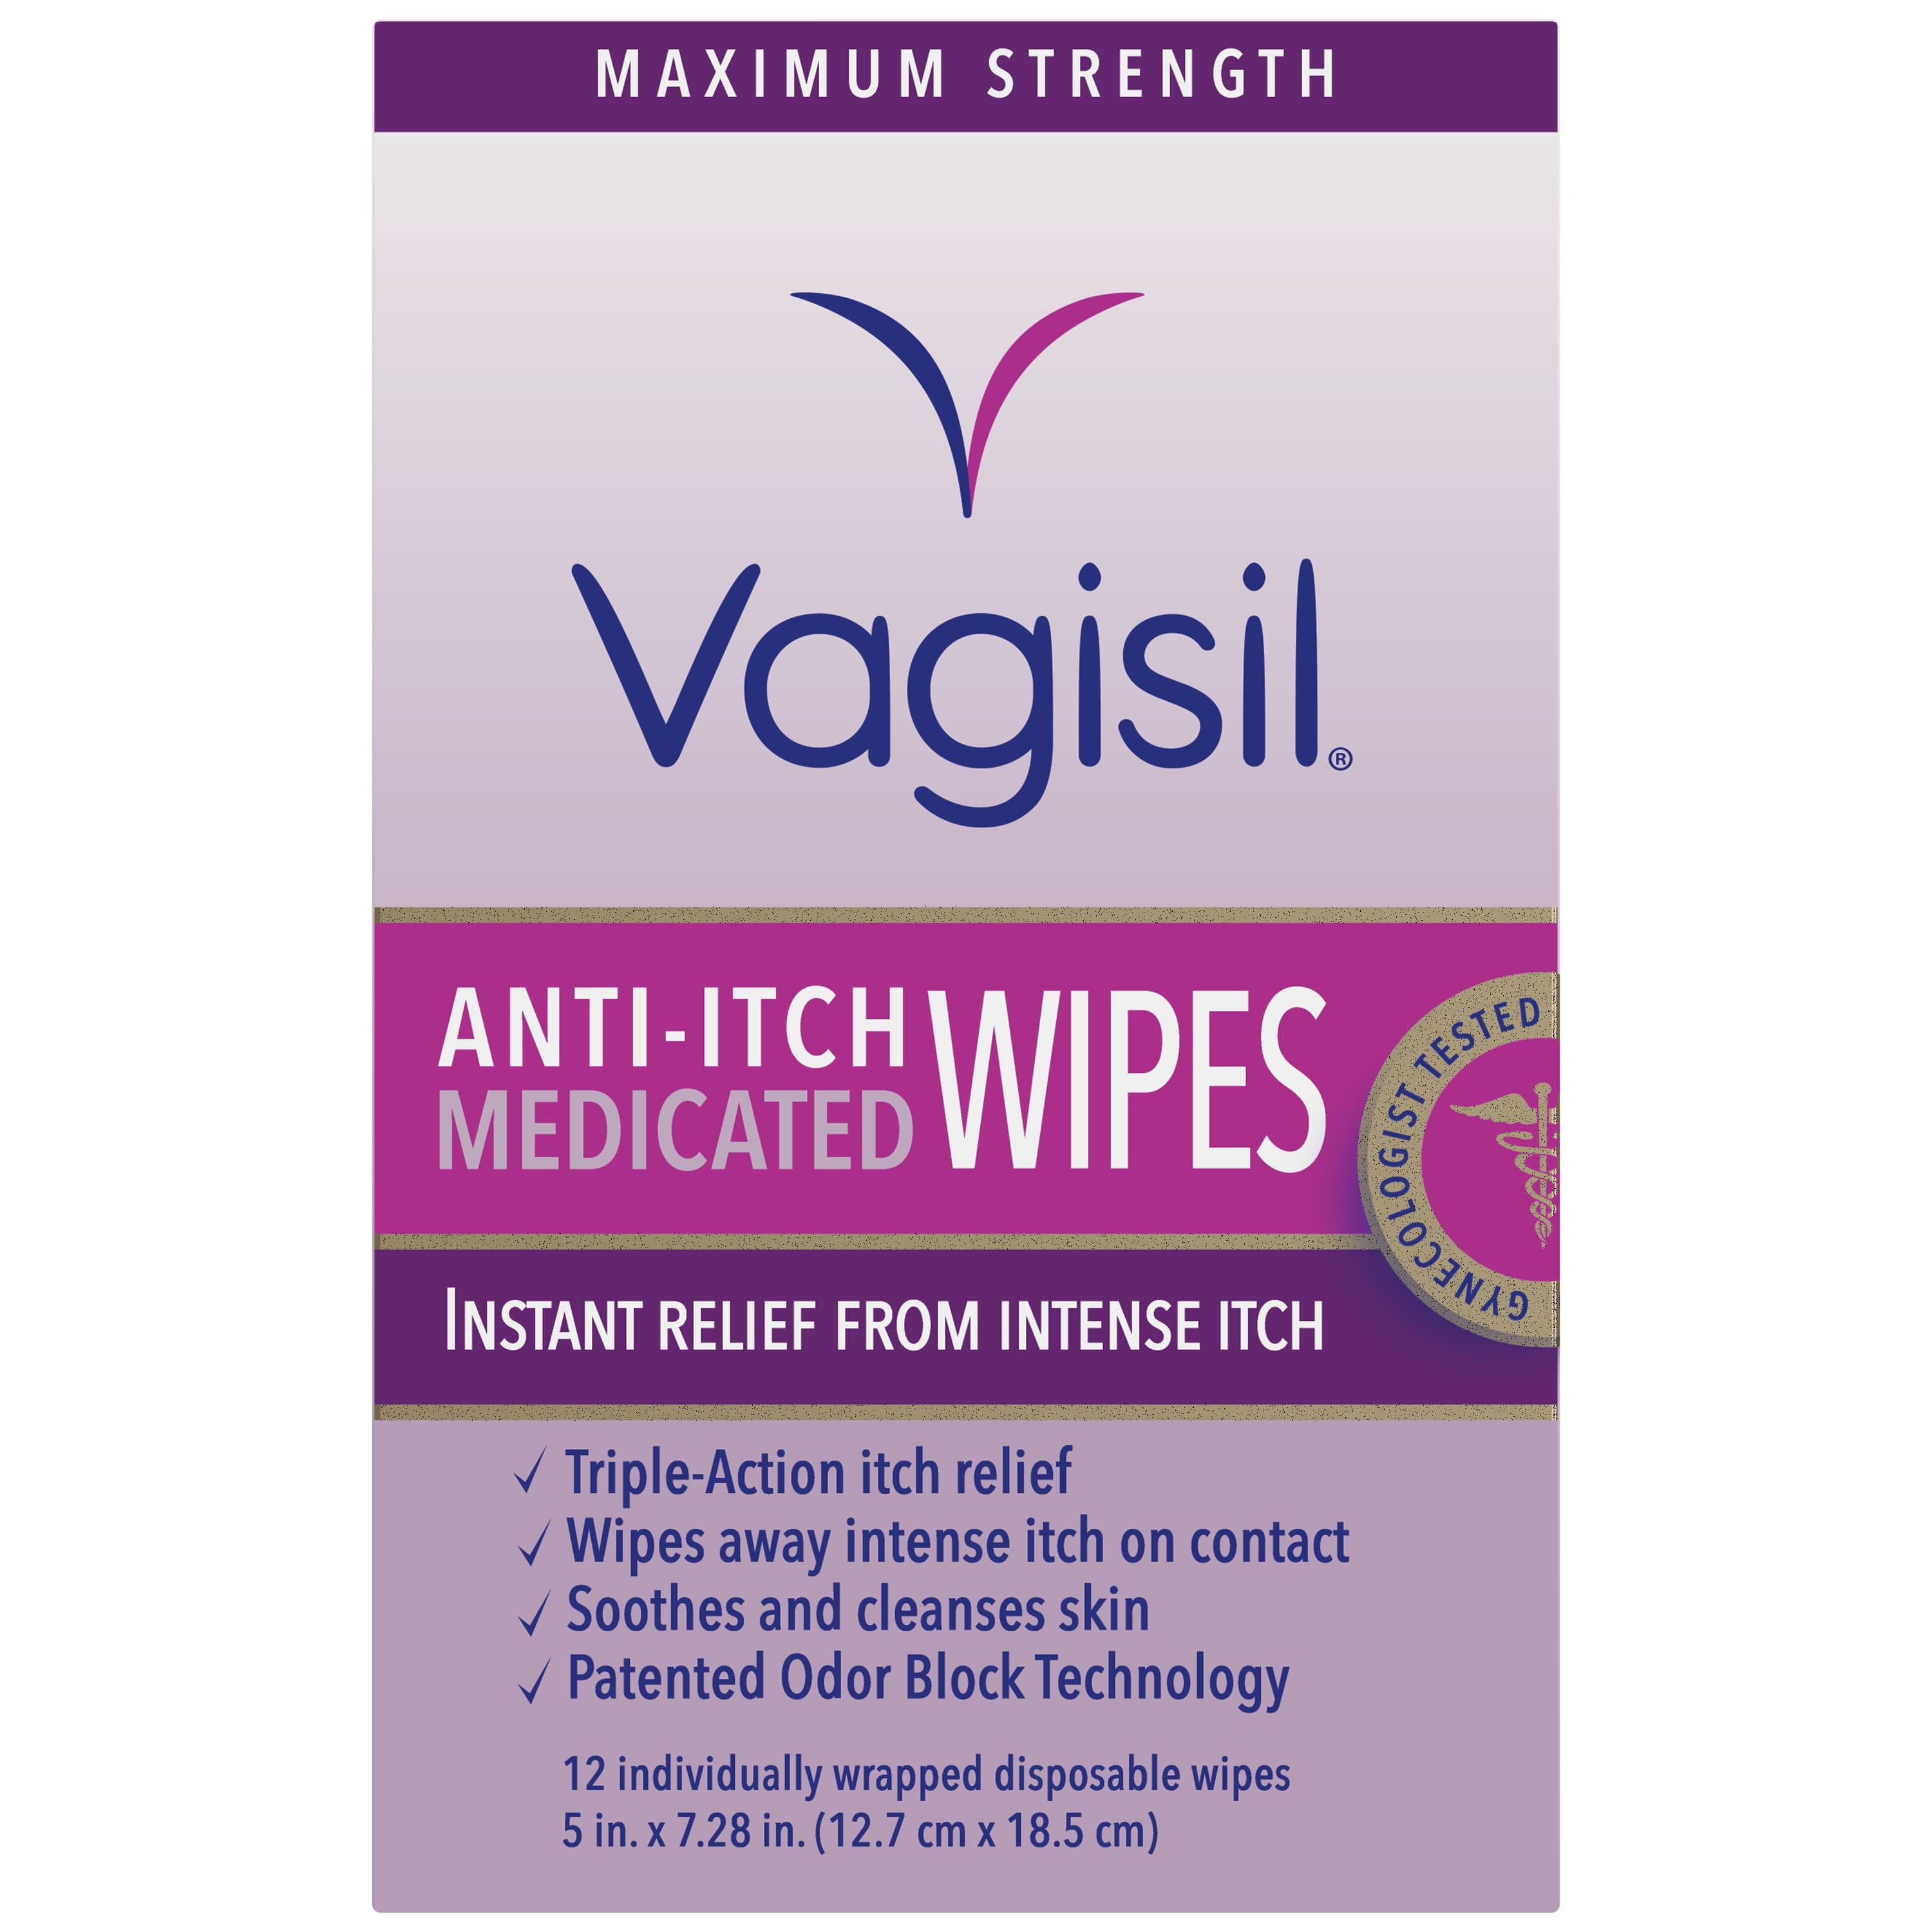 Wholesale prices with free shipping all over United States Vagisil Anti-Itch Medicated Wipes, Maximum Strength For Instant Relief, 12 Count - Steven Deals